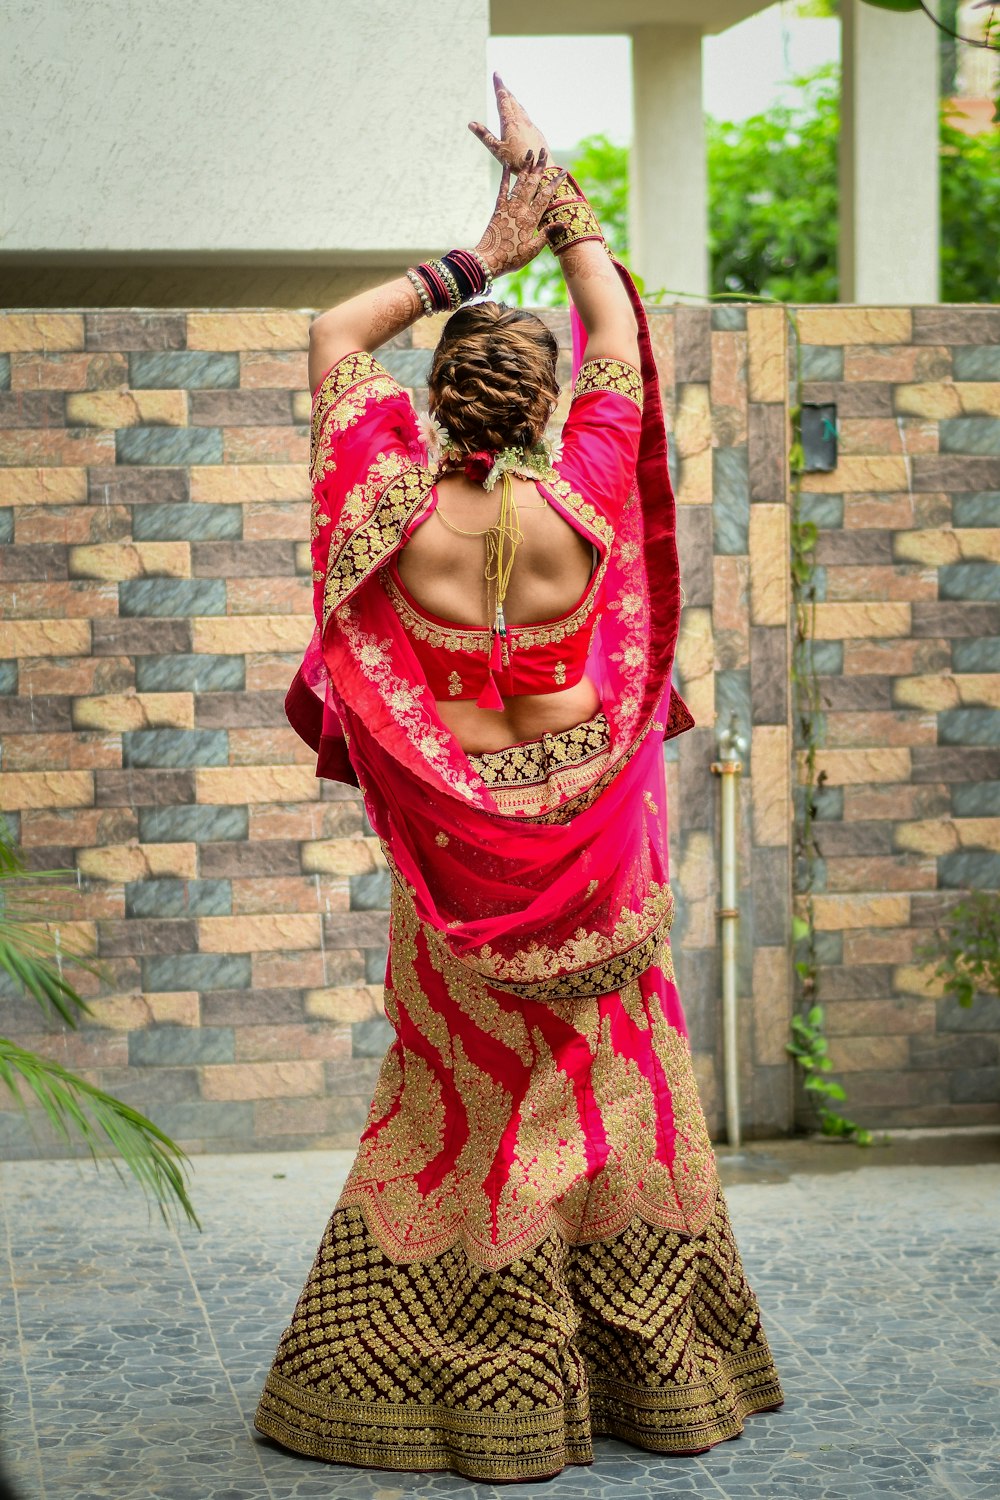 a woman in a red and gold sari dancing